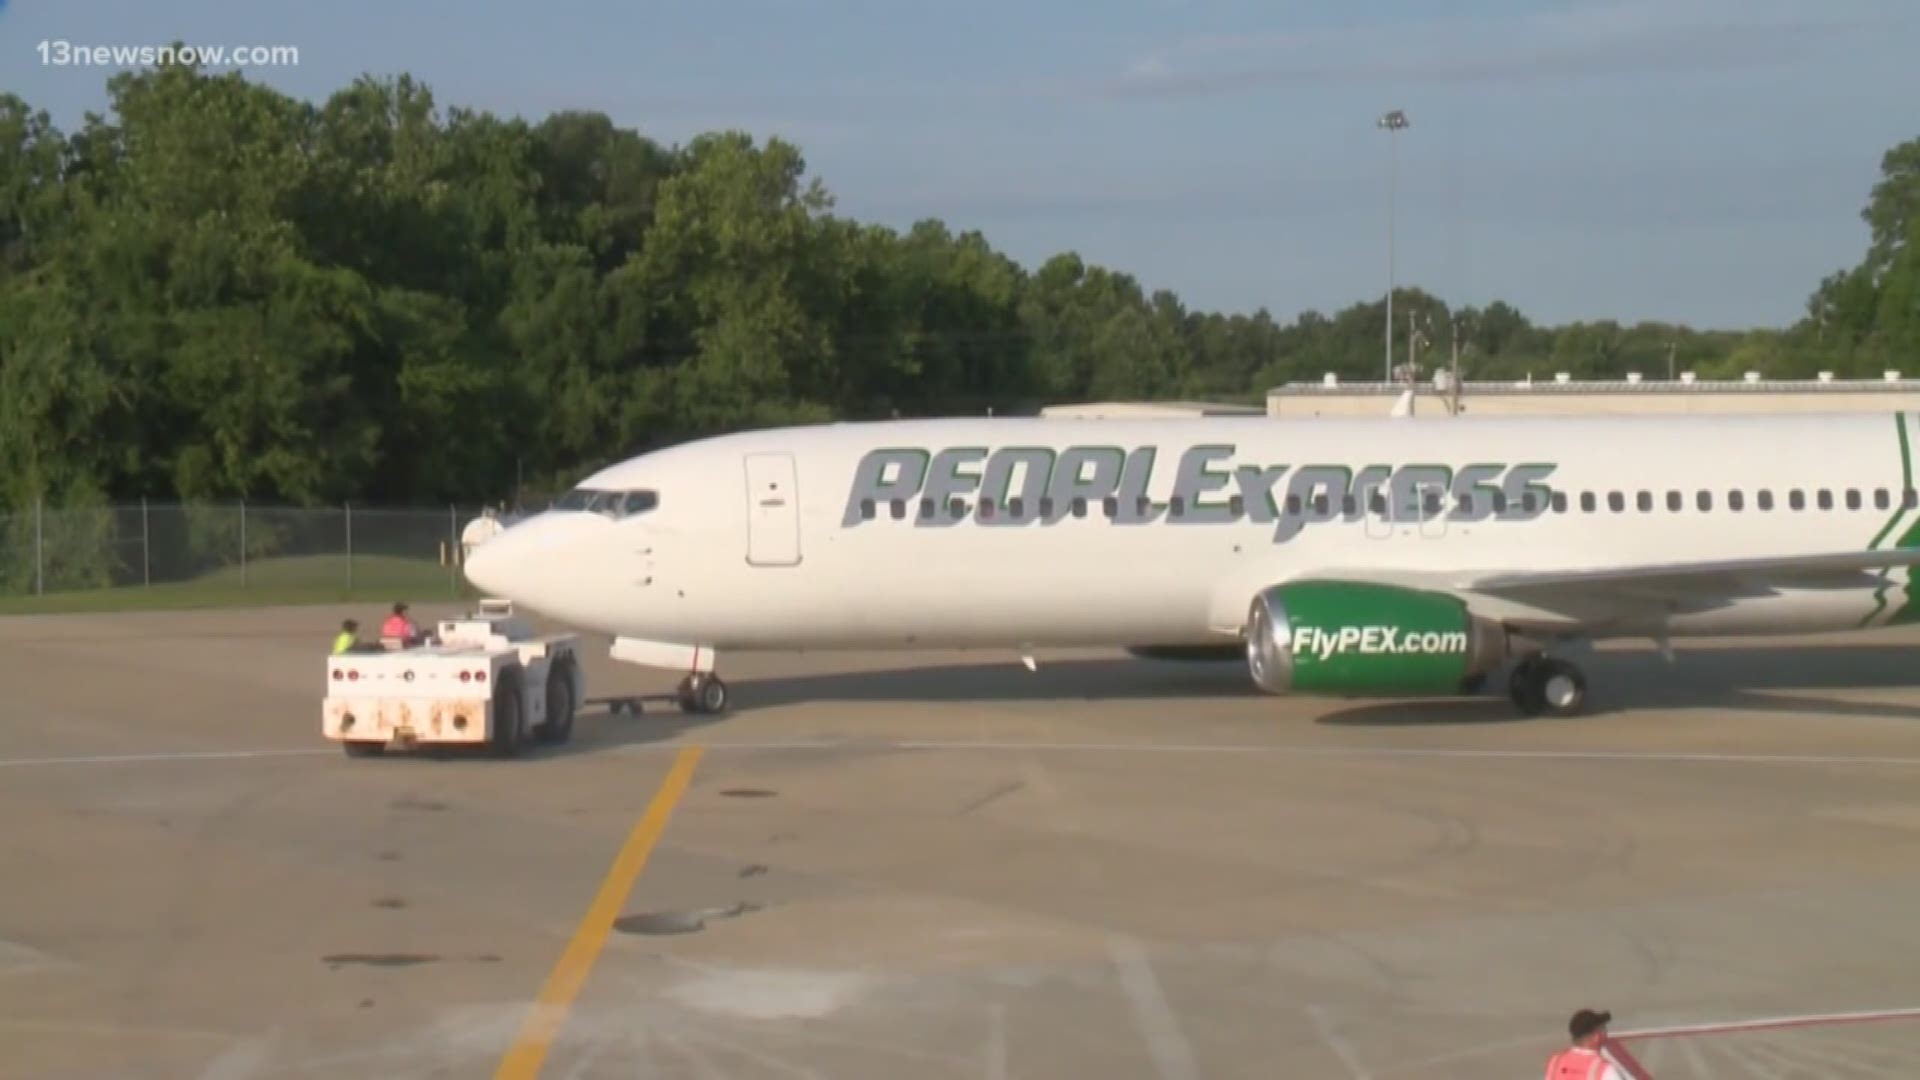 The founder of a failed startup airline out of Newport News has been sent to prison.